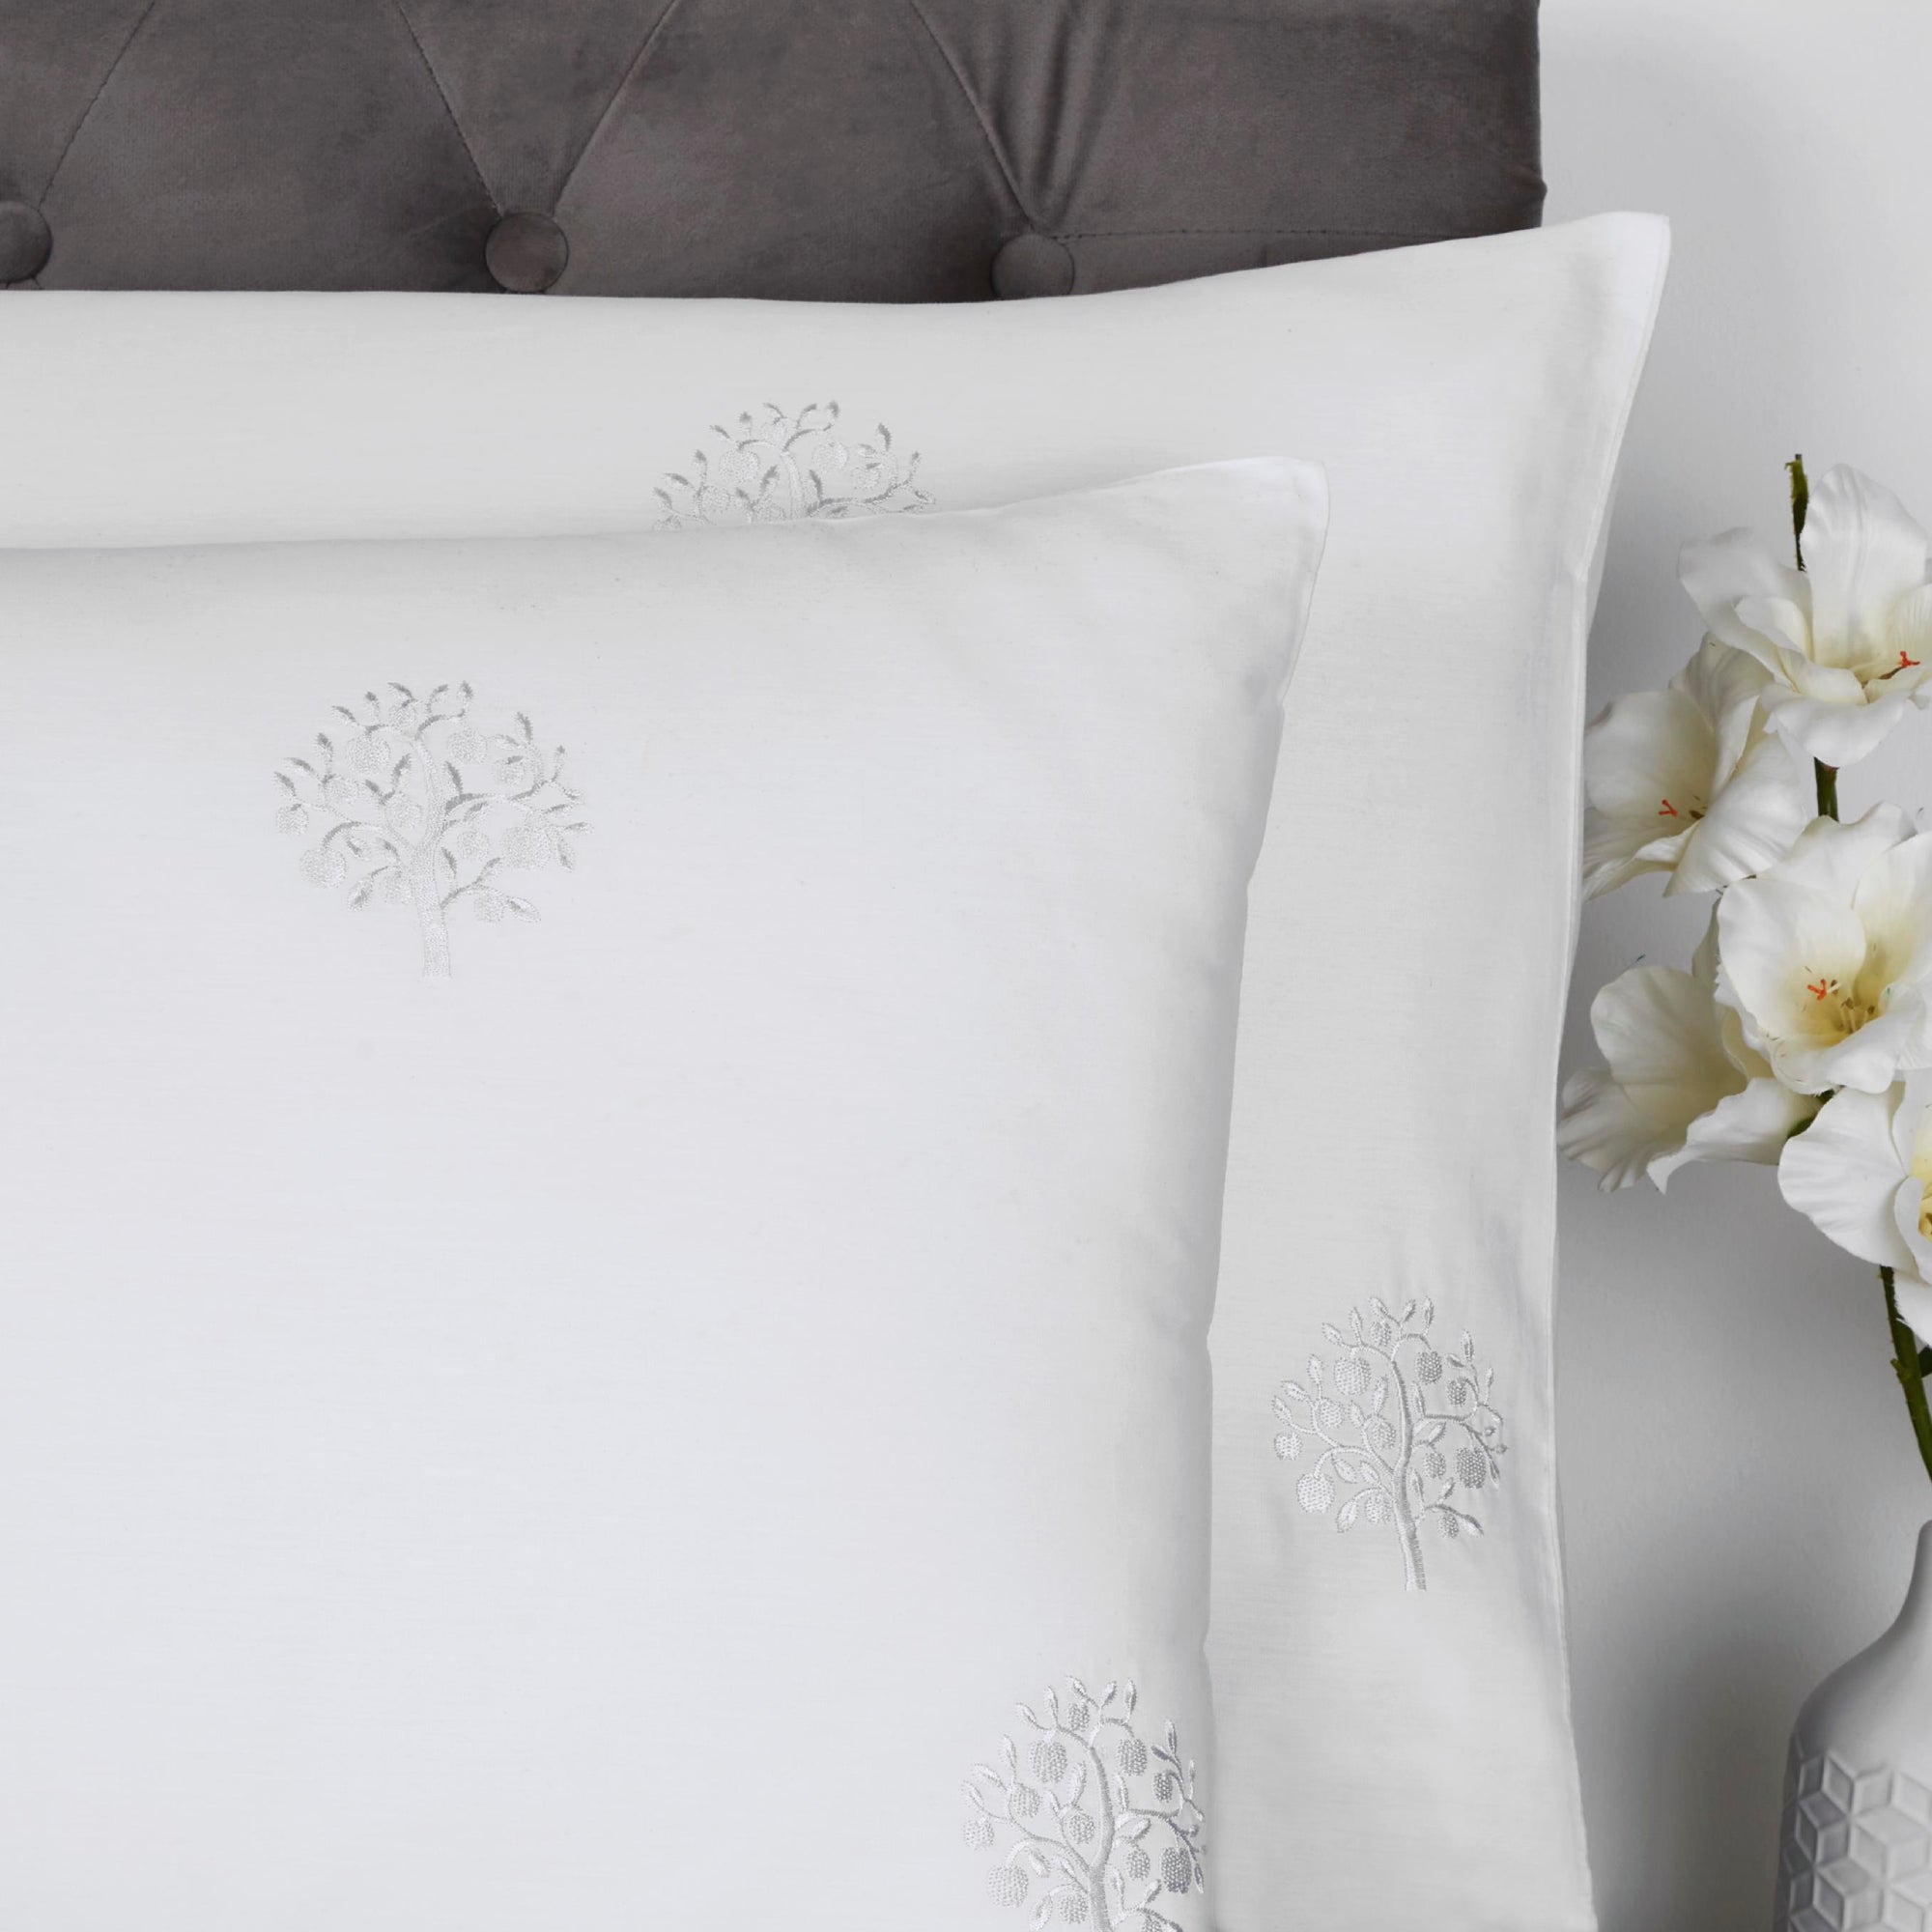 Duvet Cover Set Embroidered Trees by Appletree Boutique in White